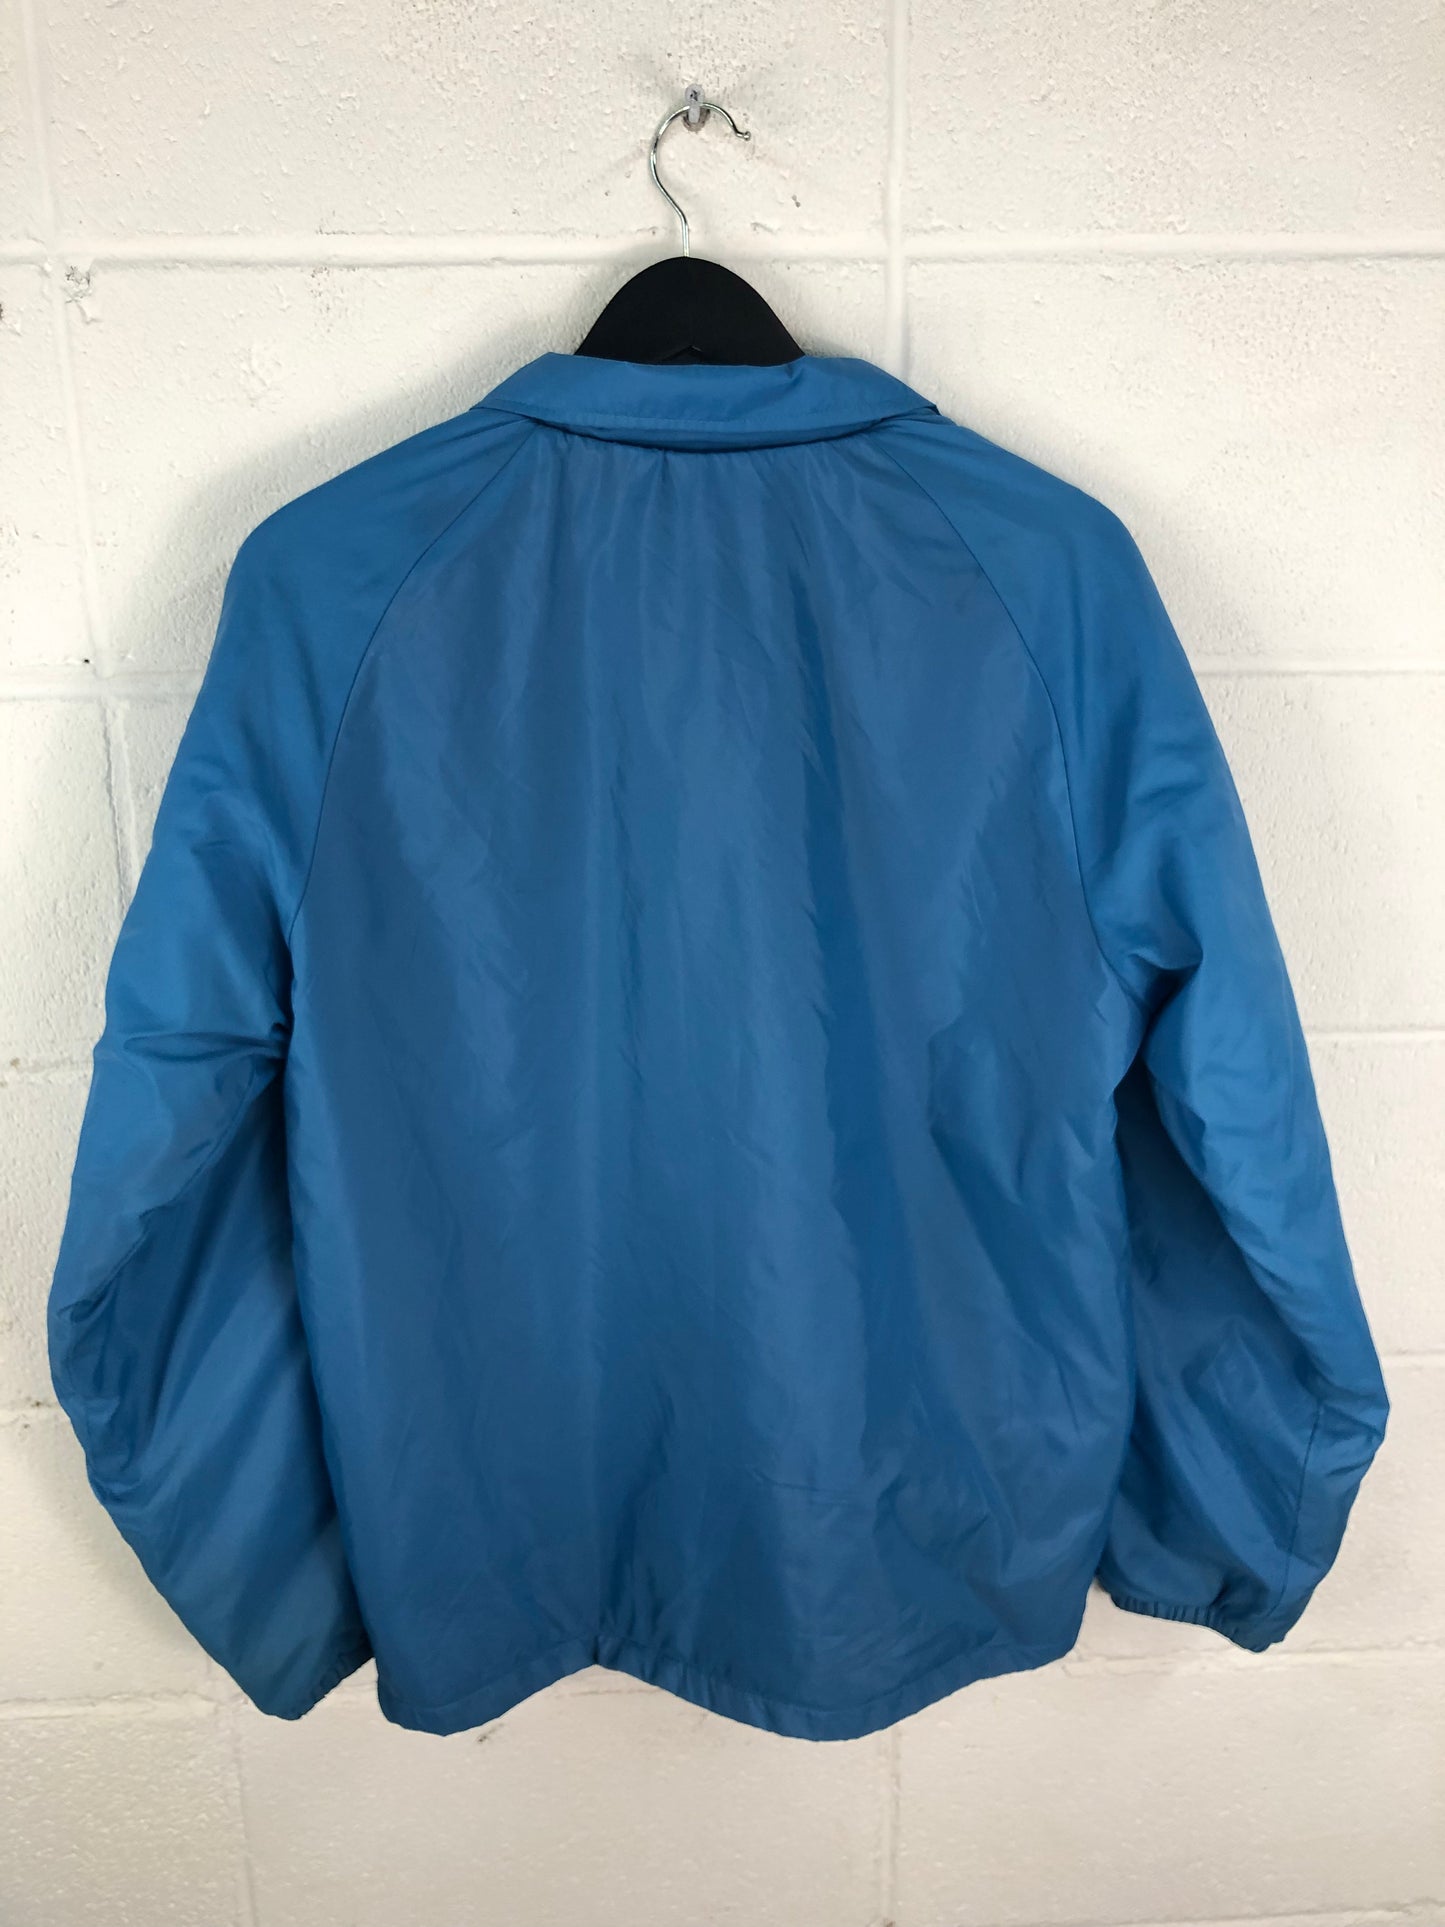 Load image into Gallery viewer, VTG NFL Blue Button Up Coach Jacket Sz L
